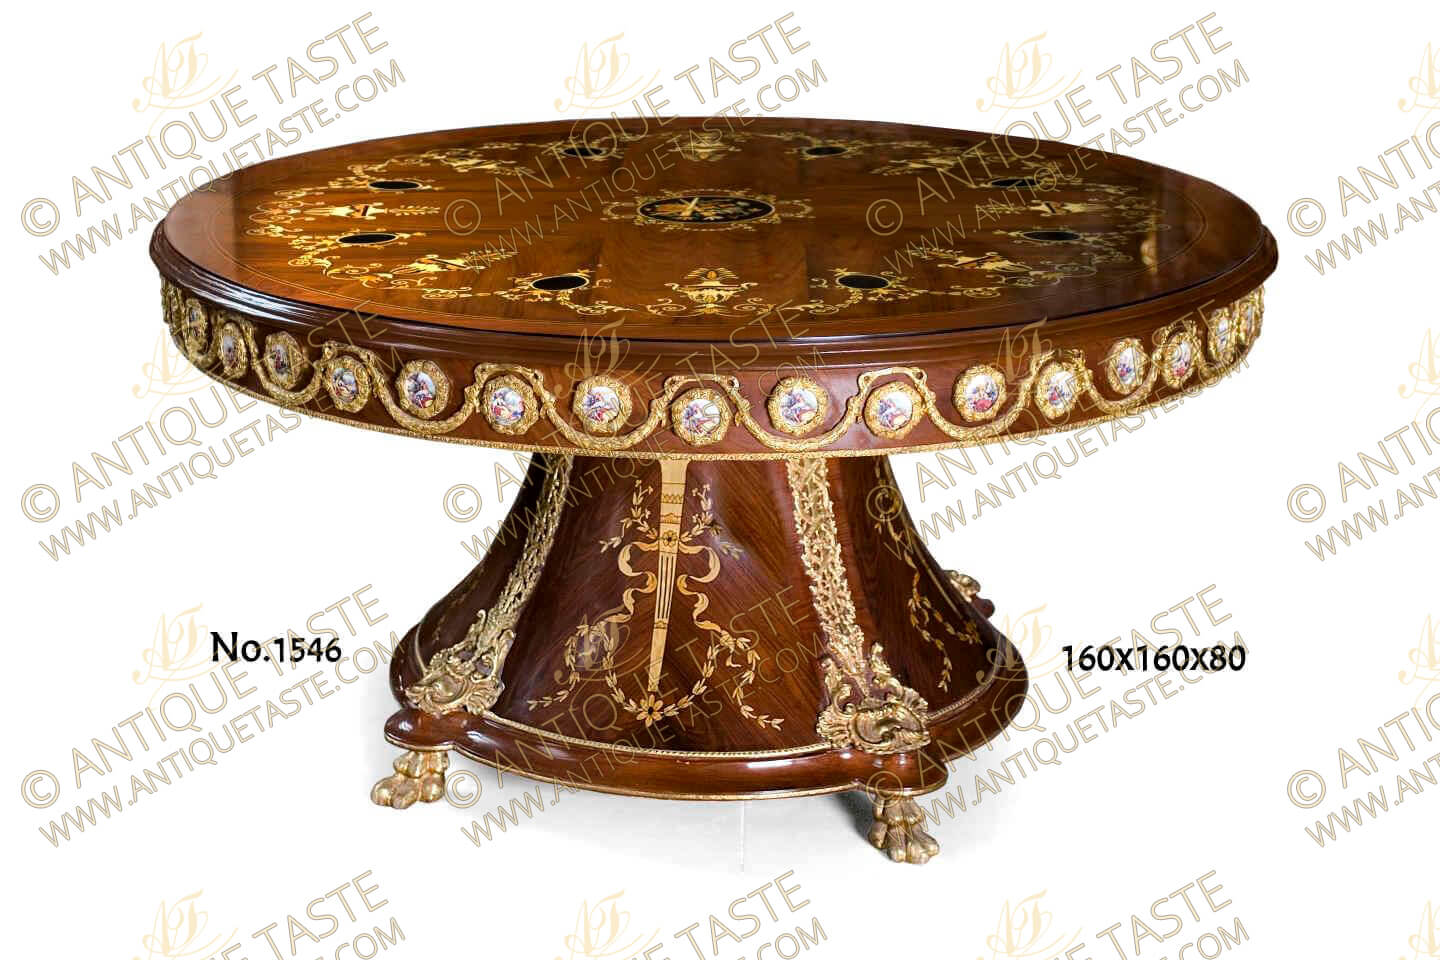 Empire style gilt-ormolu-mounted Sèvres porcelain plaques marquetry and veneer inlaid grand Center Table